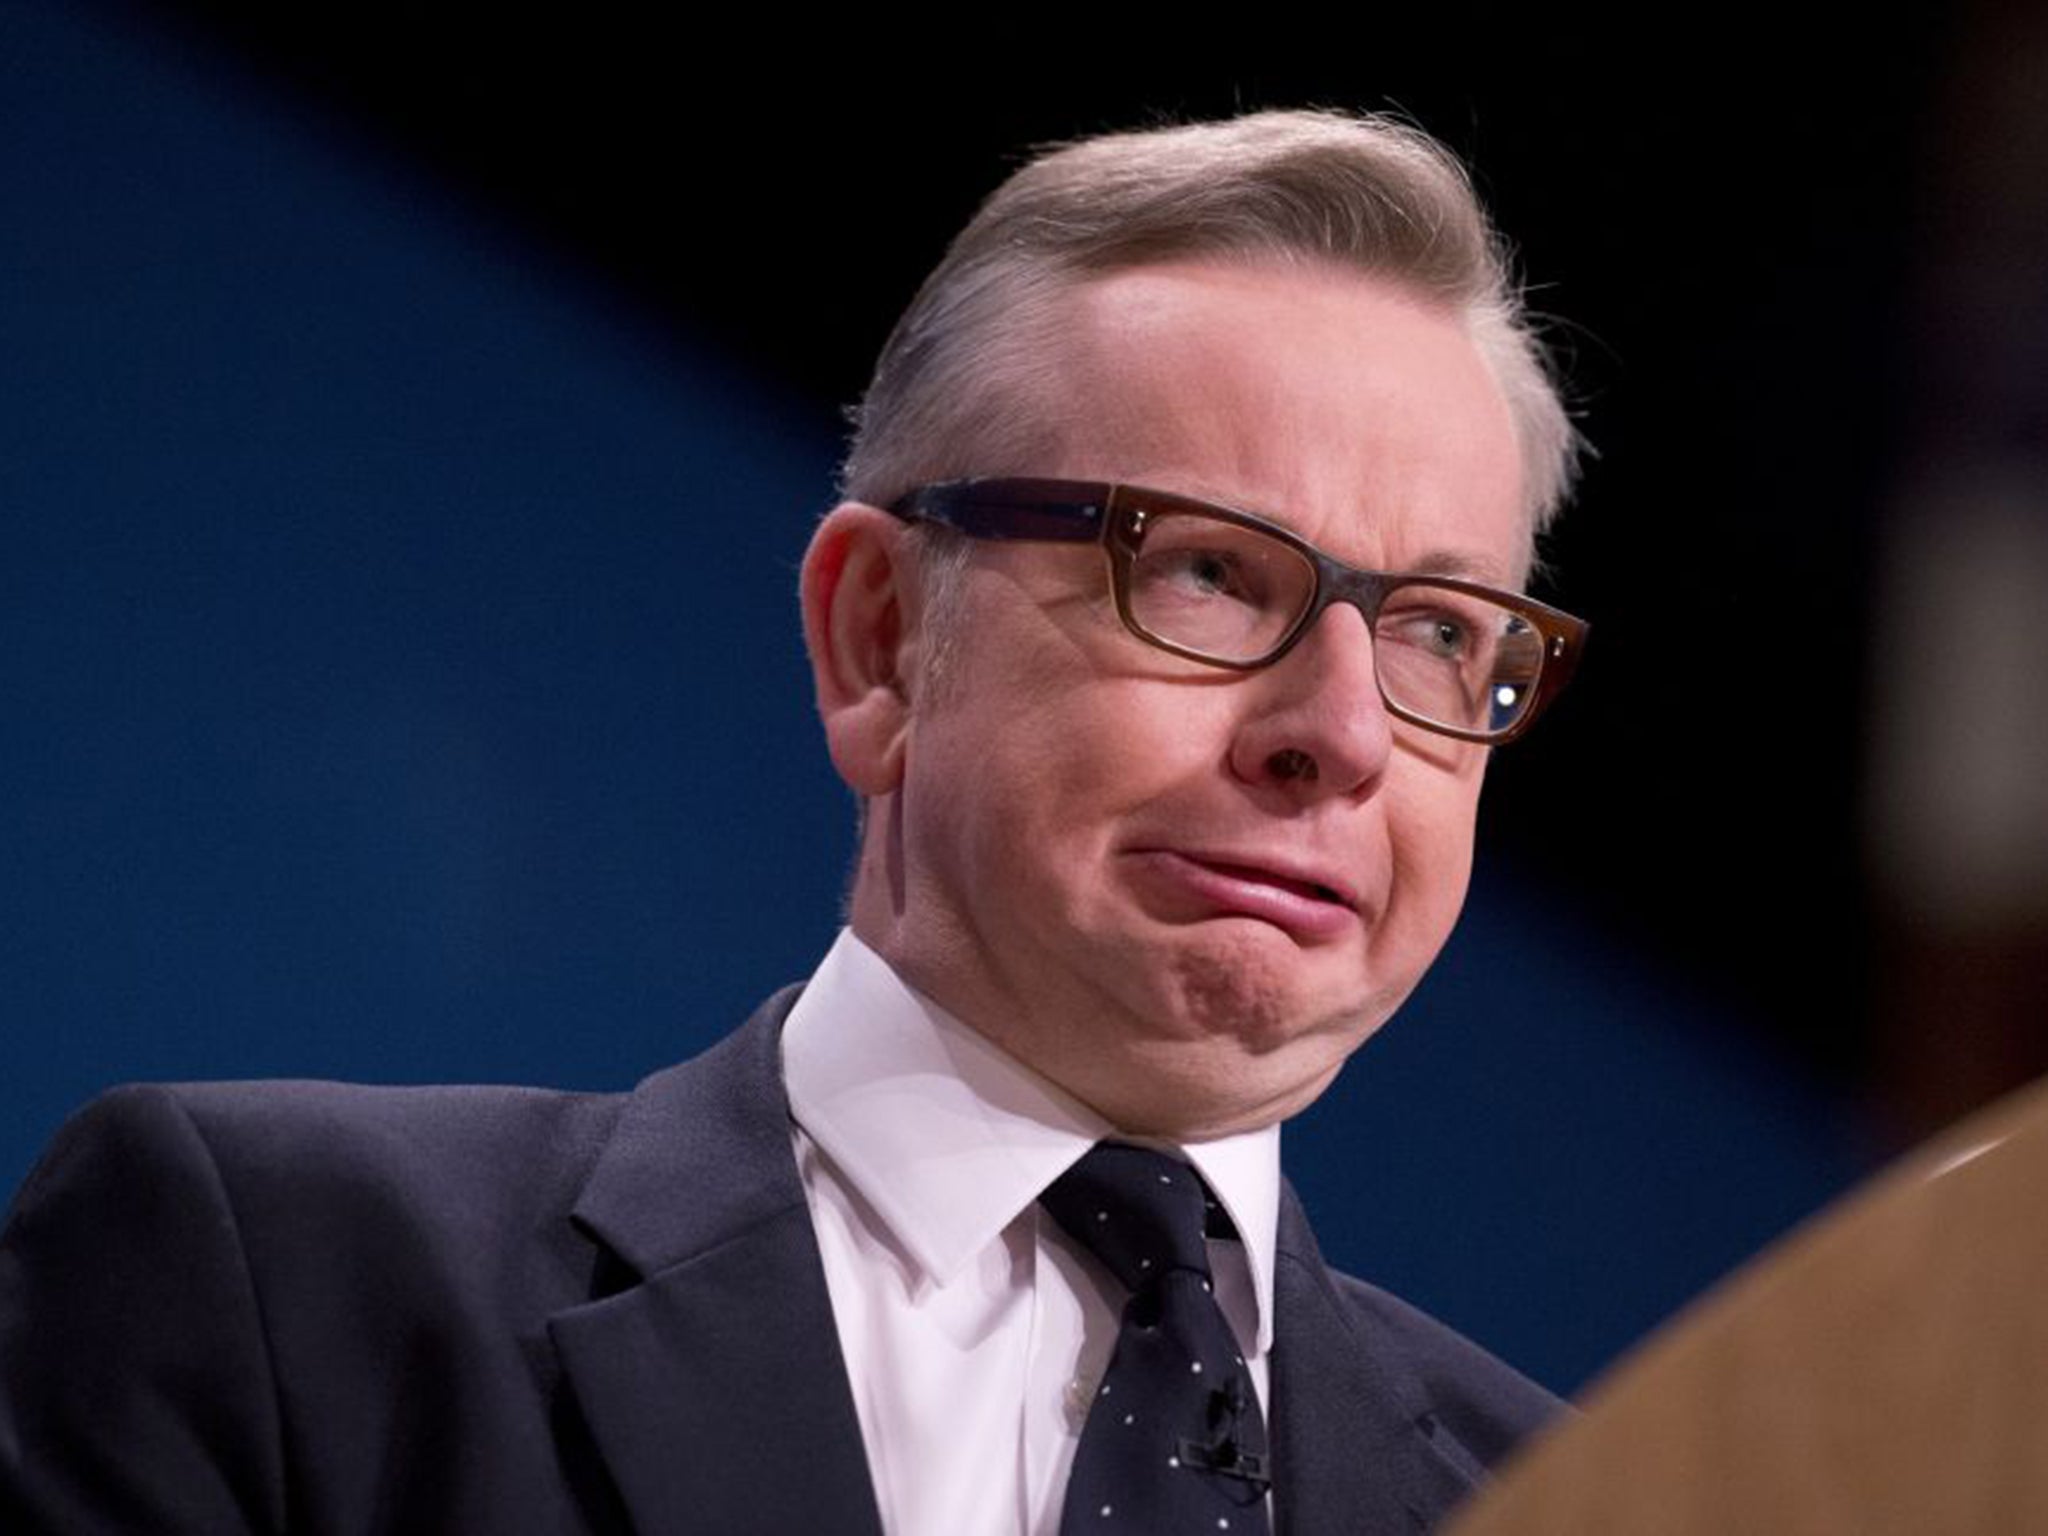 Michael Gove will commit himself to streamlining the justice system in England and Wales